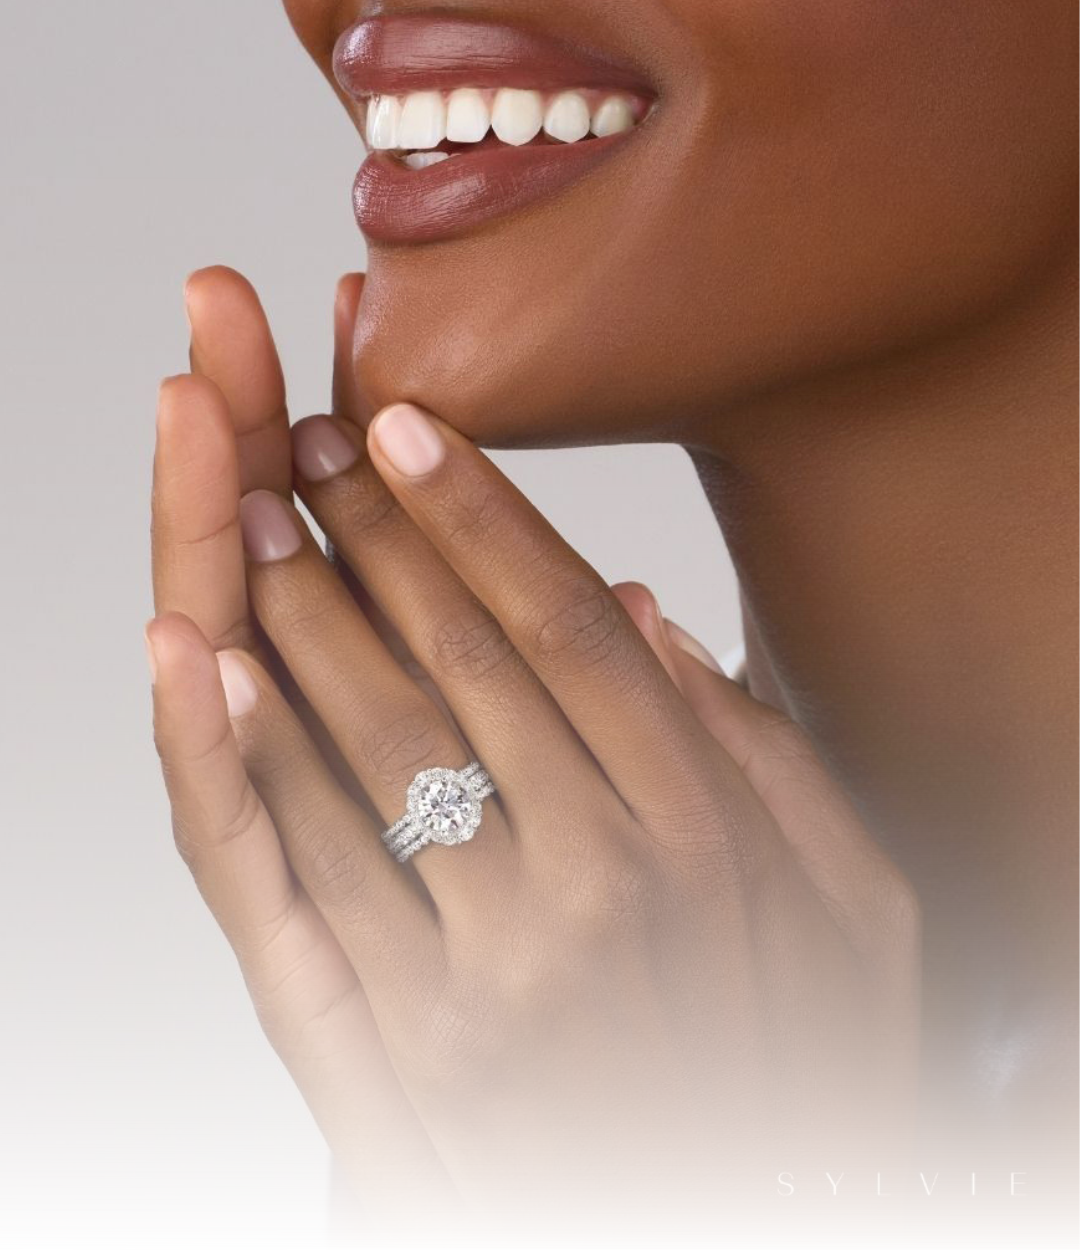 Image of woman wearing beautiful engagement ring and wedding bands.